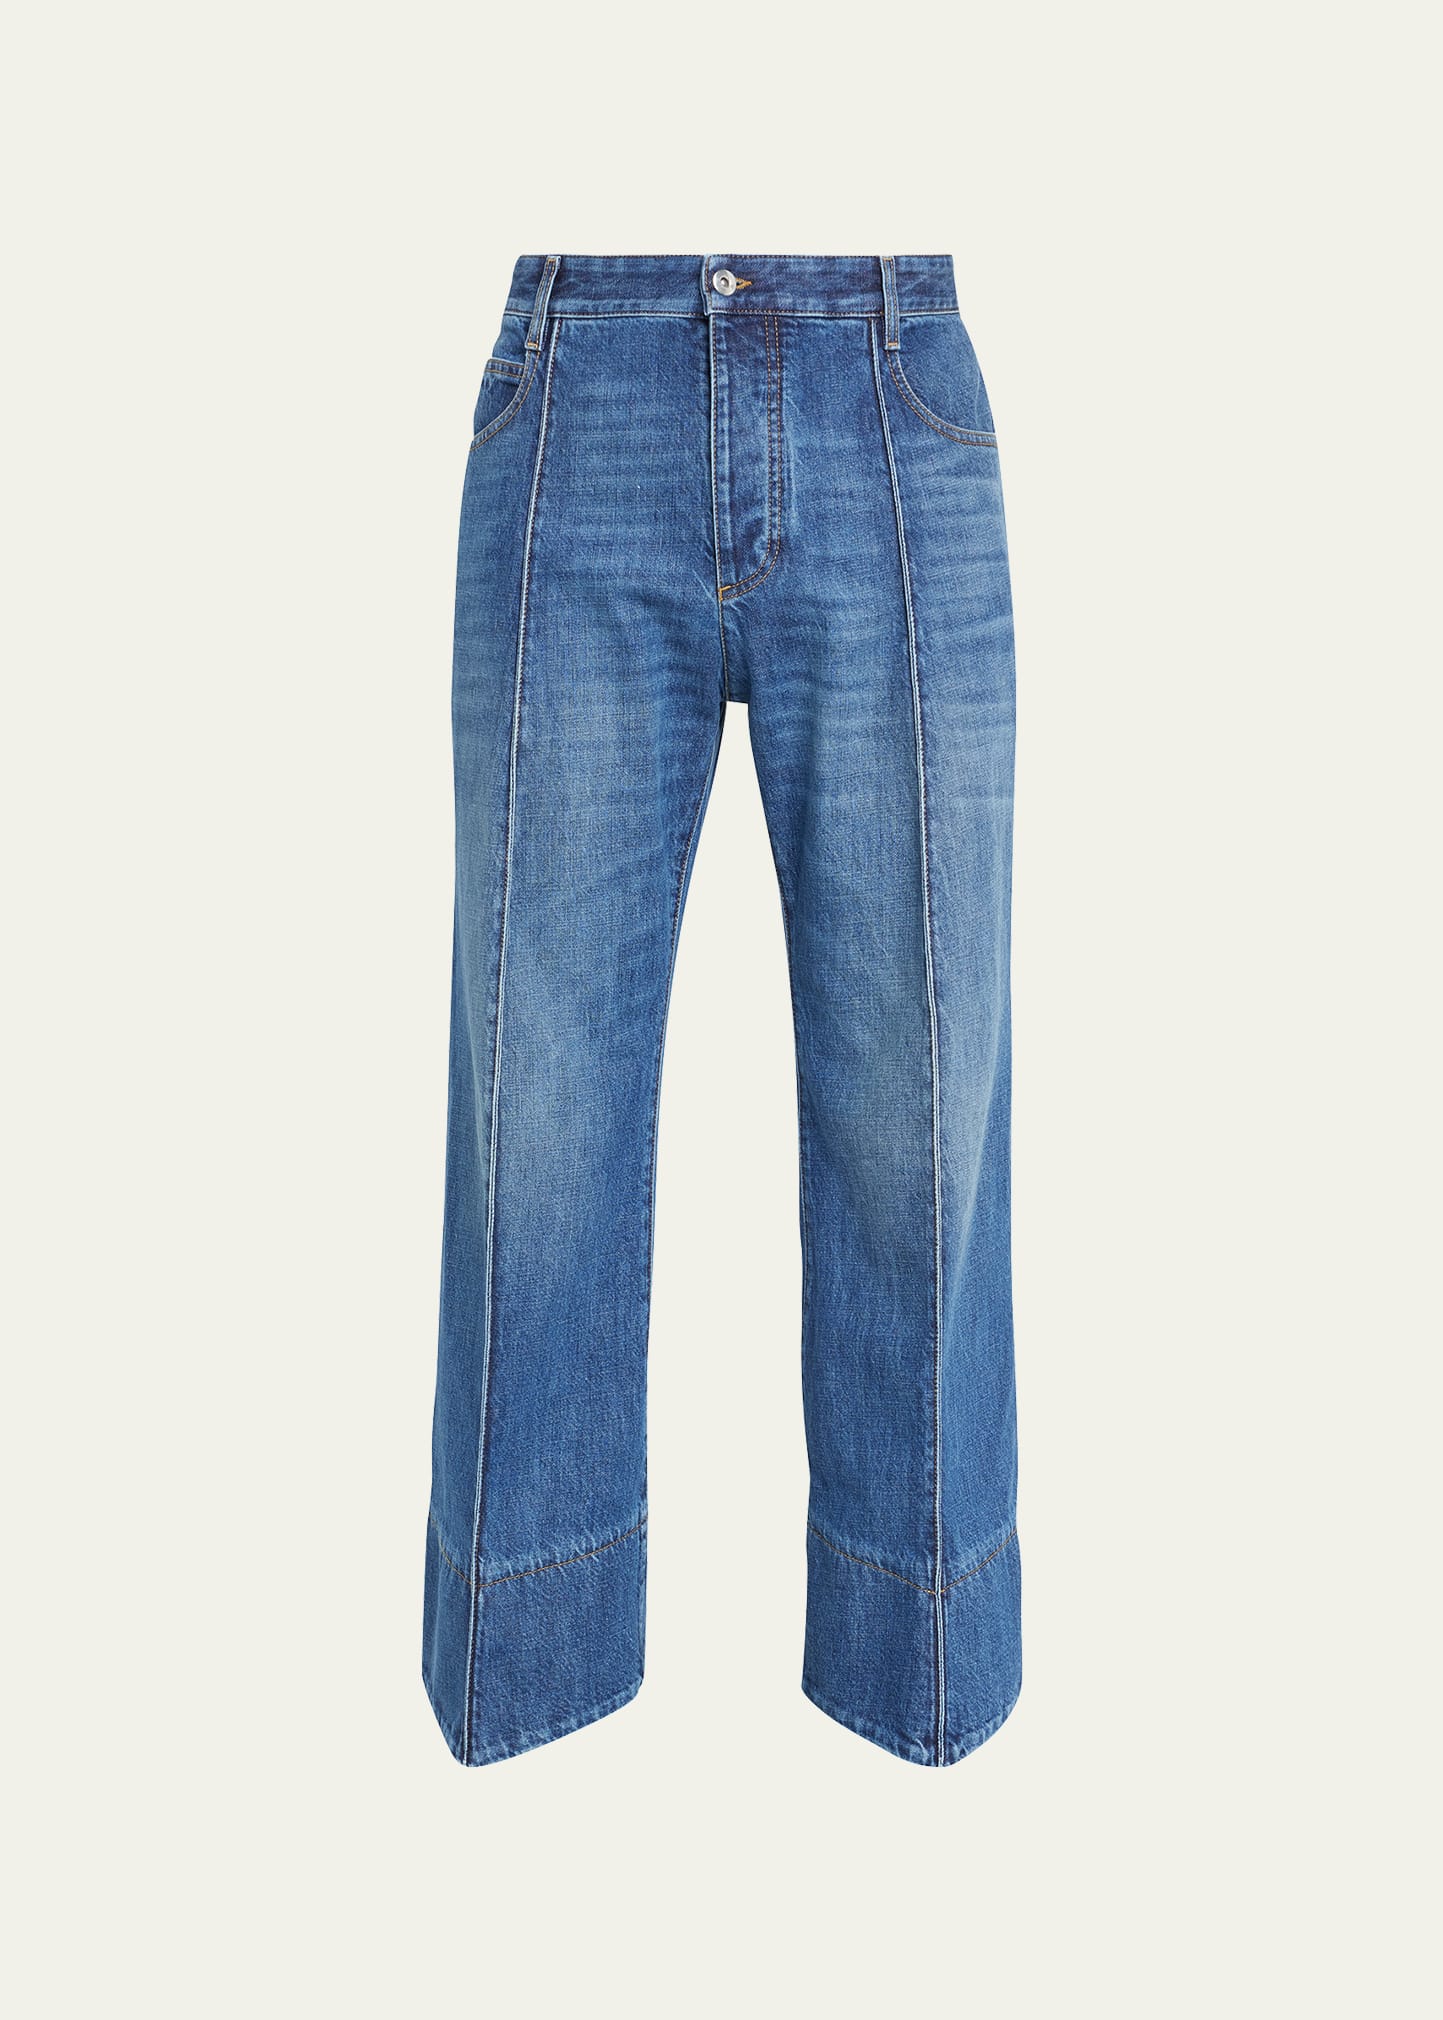 Men's Curved Jeans with Center Seam